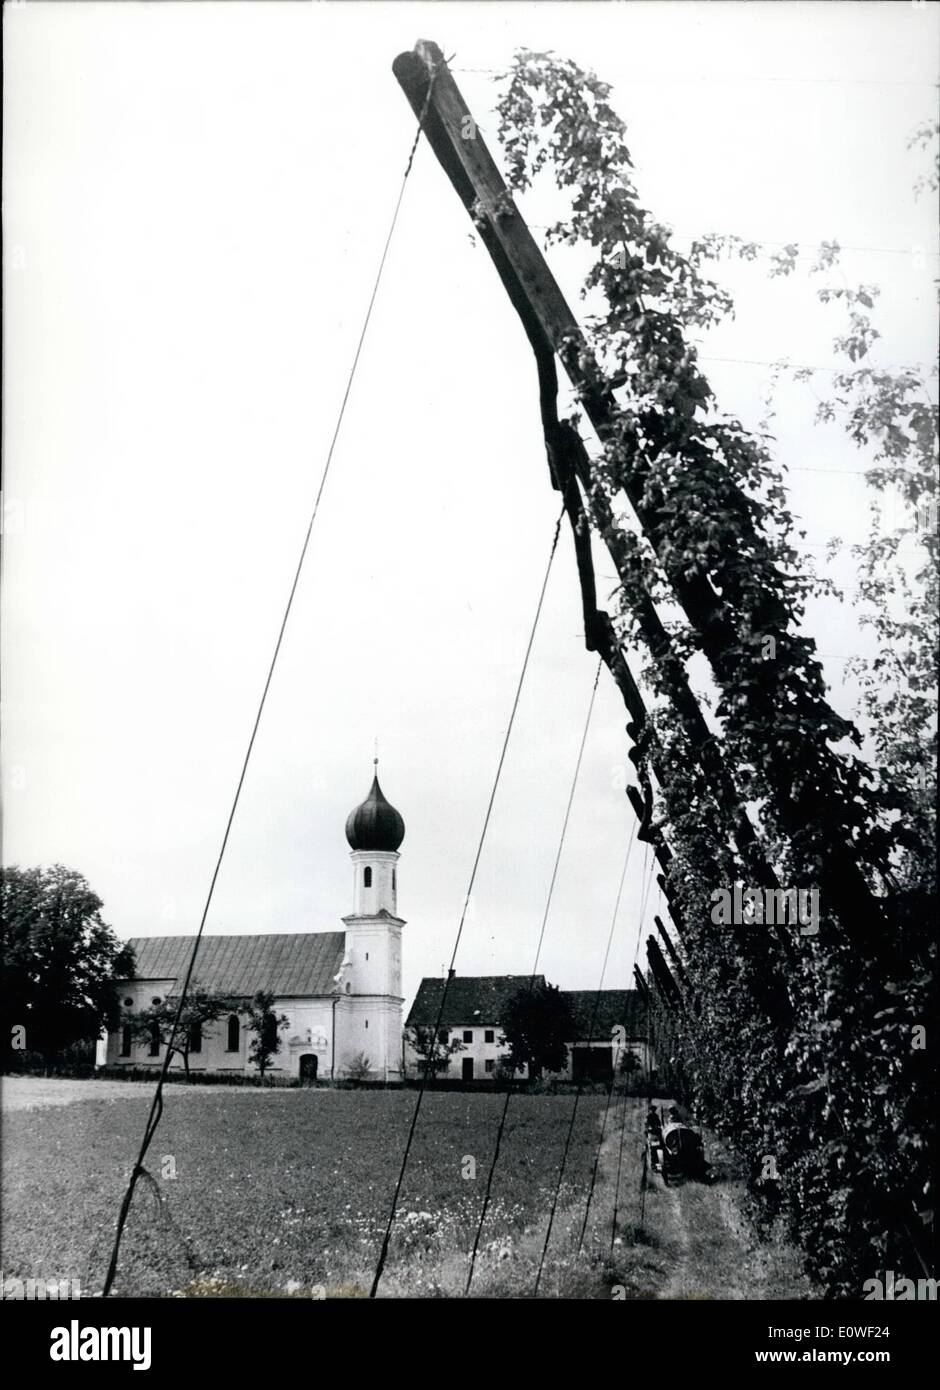 Aug. 08, 1962 - Entirely framed by hop-gardens: is the Lohwinded (Lohwinden) church of pilgrimage in Lower Bavaria. As clcisters used to brew the best beer and even now continue with excellent brewing, hope and church harmonize in good neighborhood forming a fine scene. Stock Photo